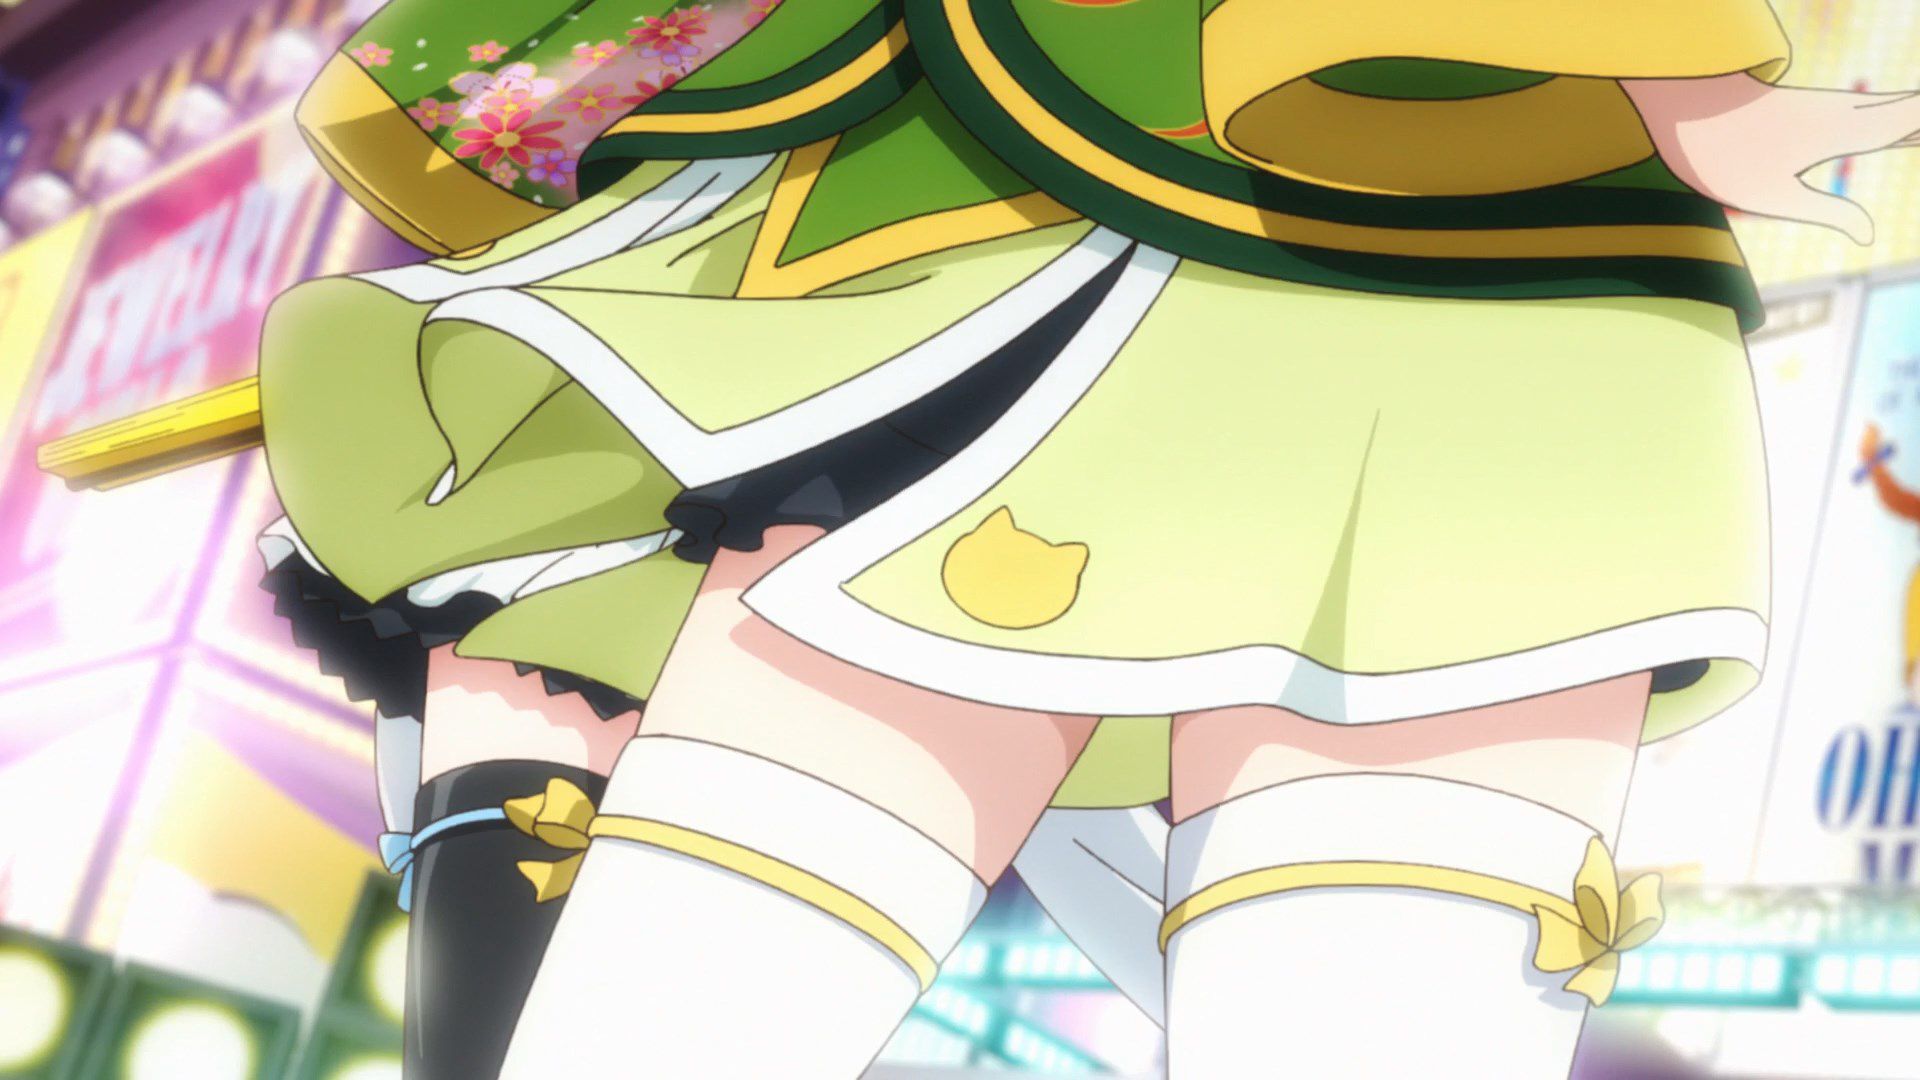 [God images] "love live! ' Μm ' PV's leg is too erotic everyone wakes up to a leg fetish of wwwww 87